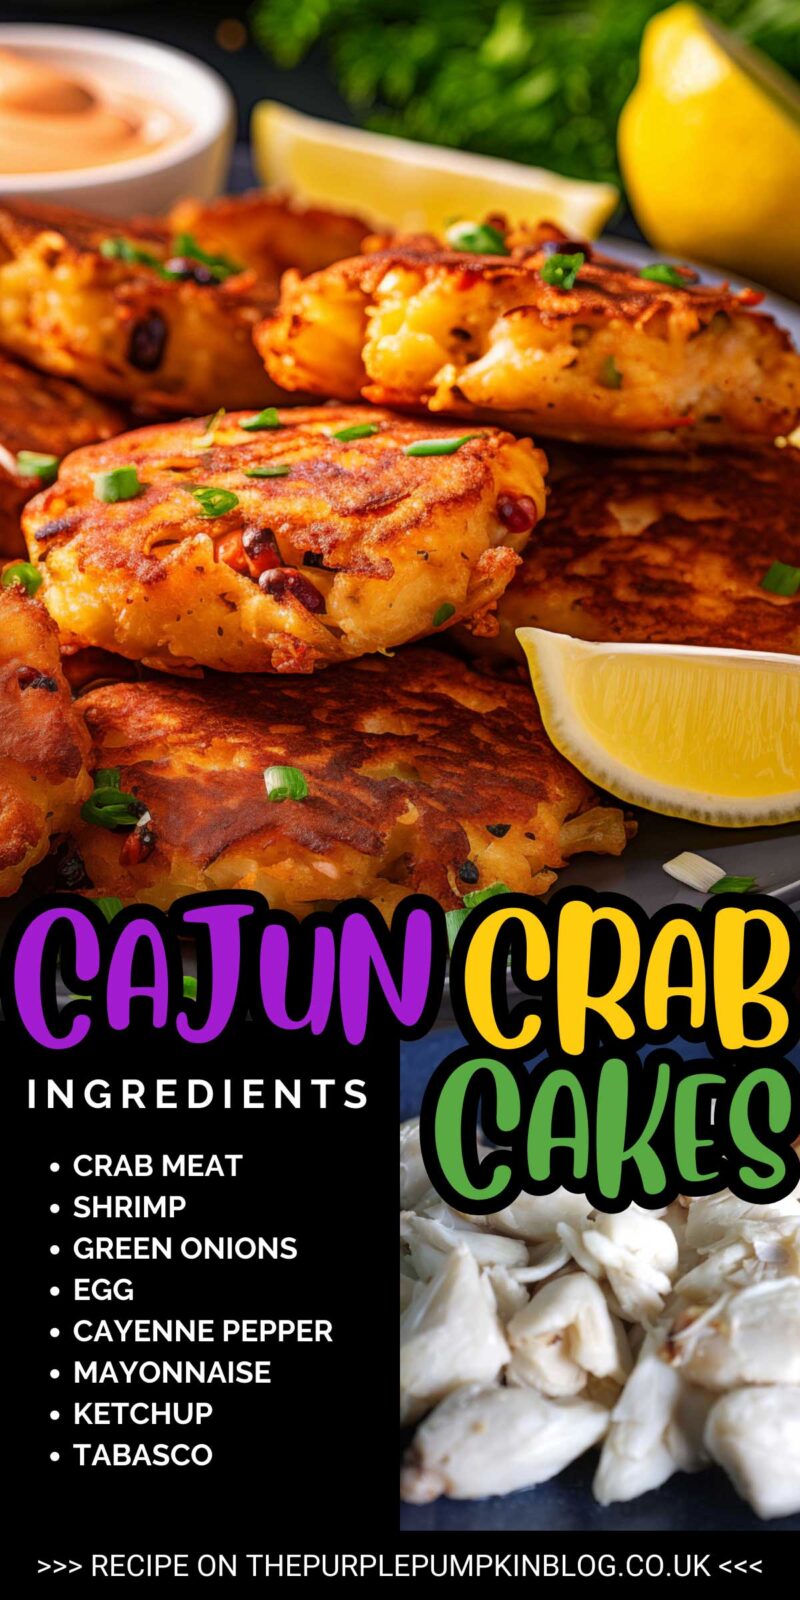 Pile of crab cakes with a list of ingredients. Text overlay says"Cajun Crab Cakes"